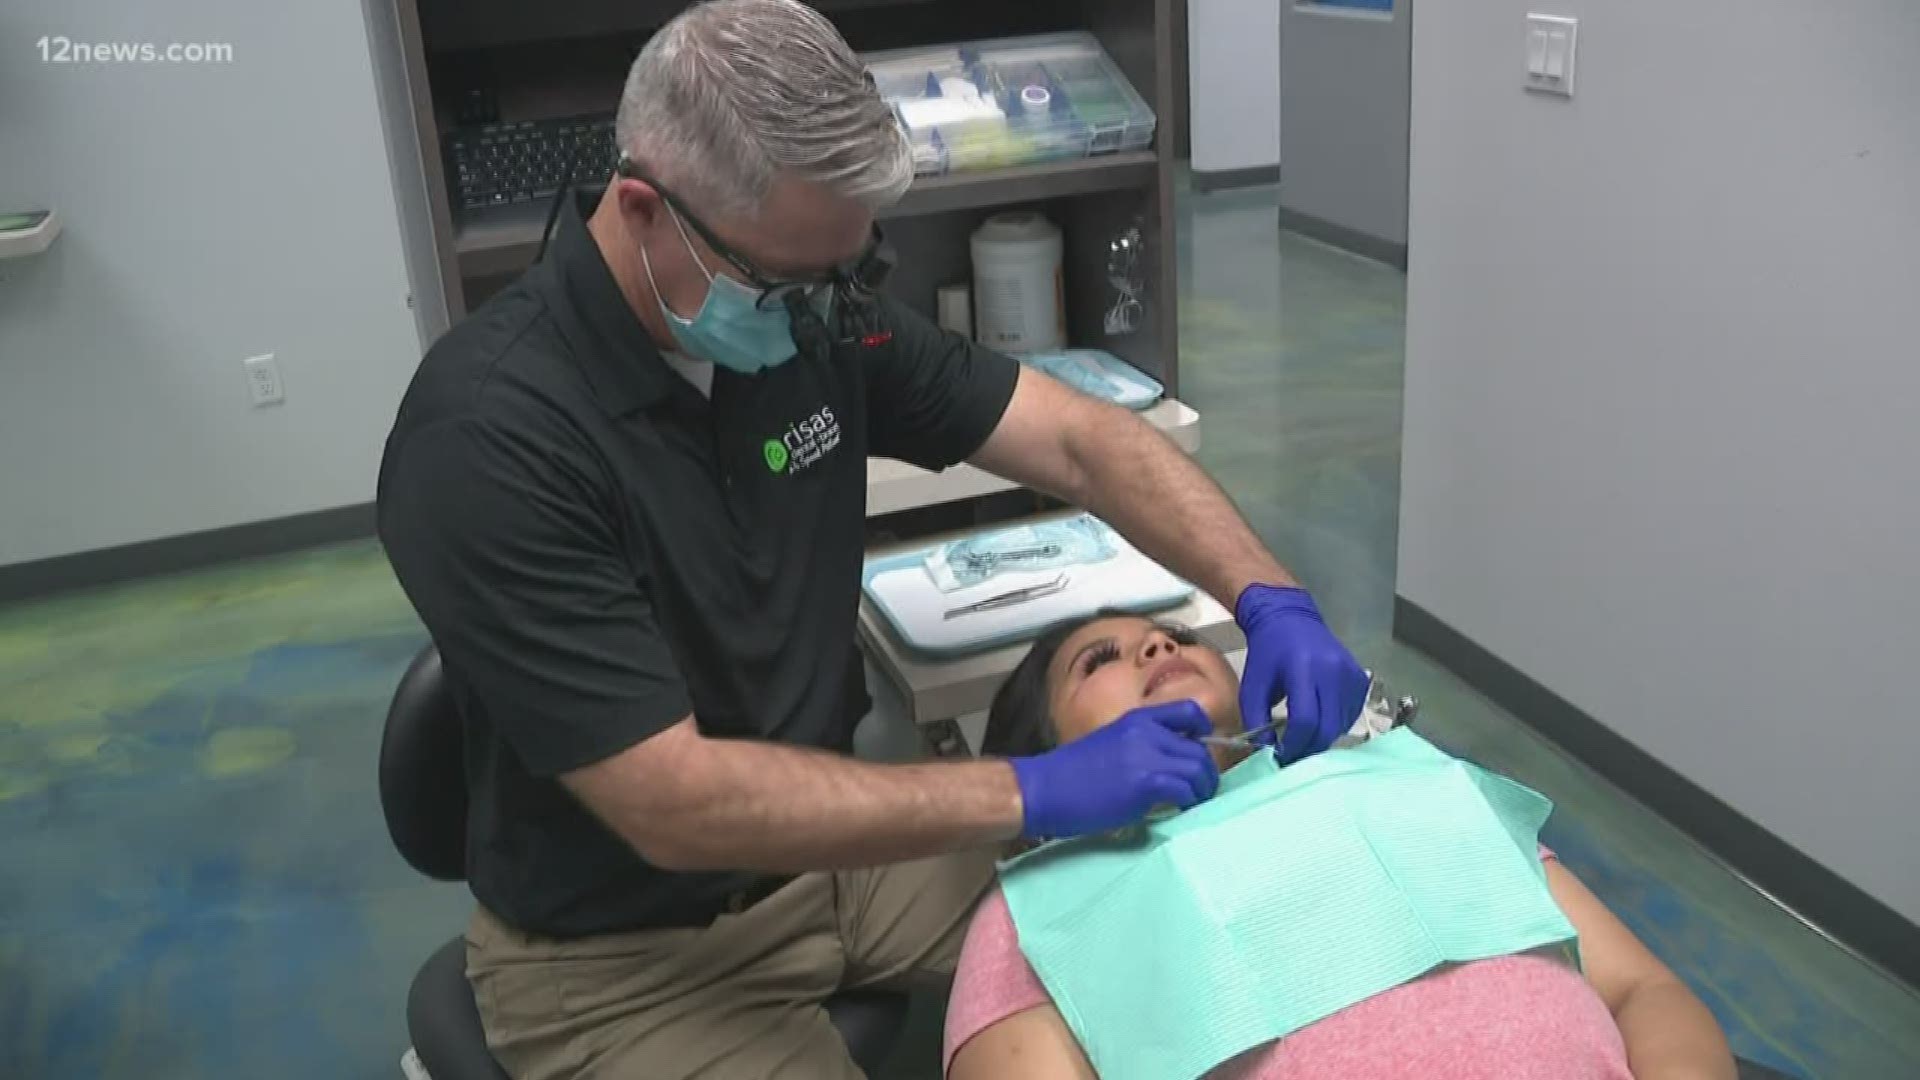 100 people at 13 Risas Dental locations in the Valley are getting free dental care, and the practice says it's their way of giving back to the community. This is the 9th annual Labor of Love event hosted by Risas Dental.